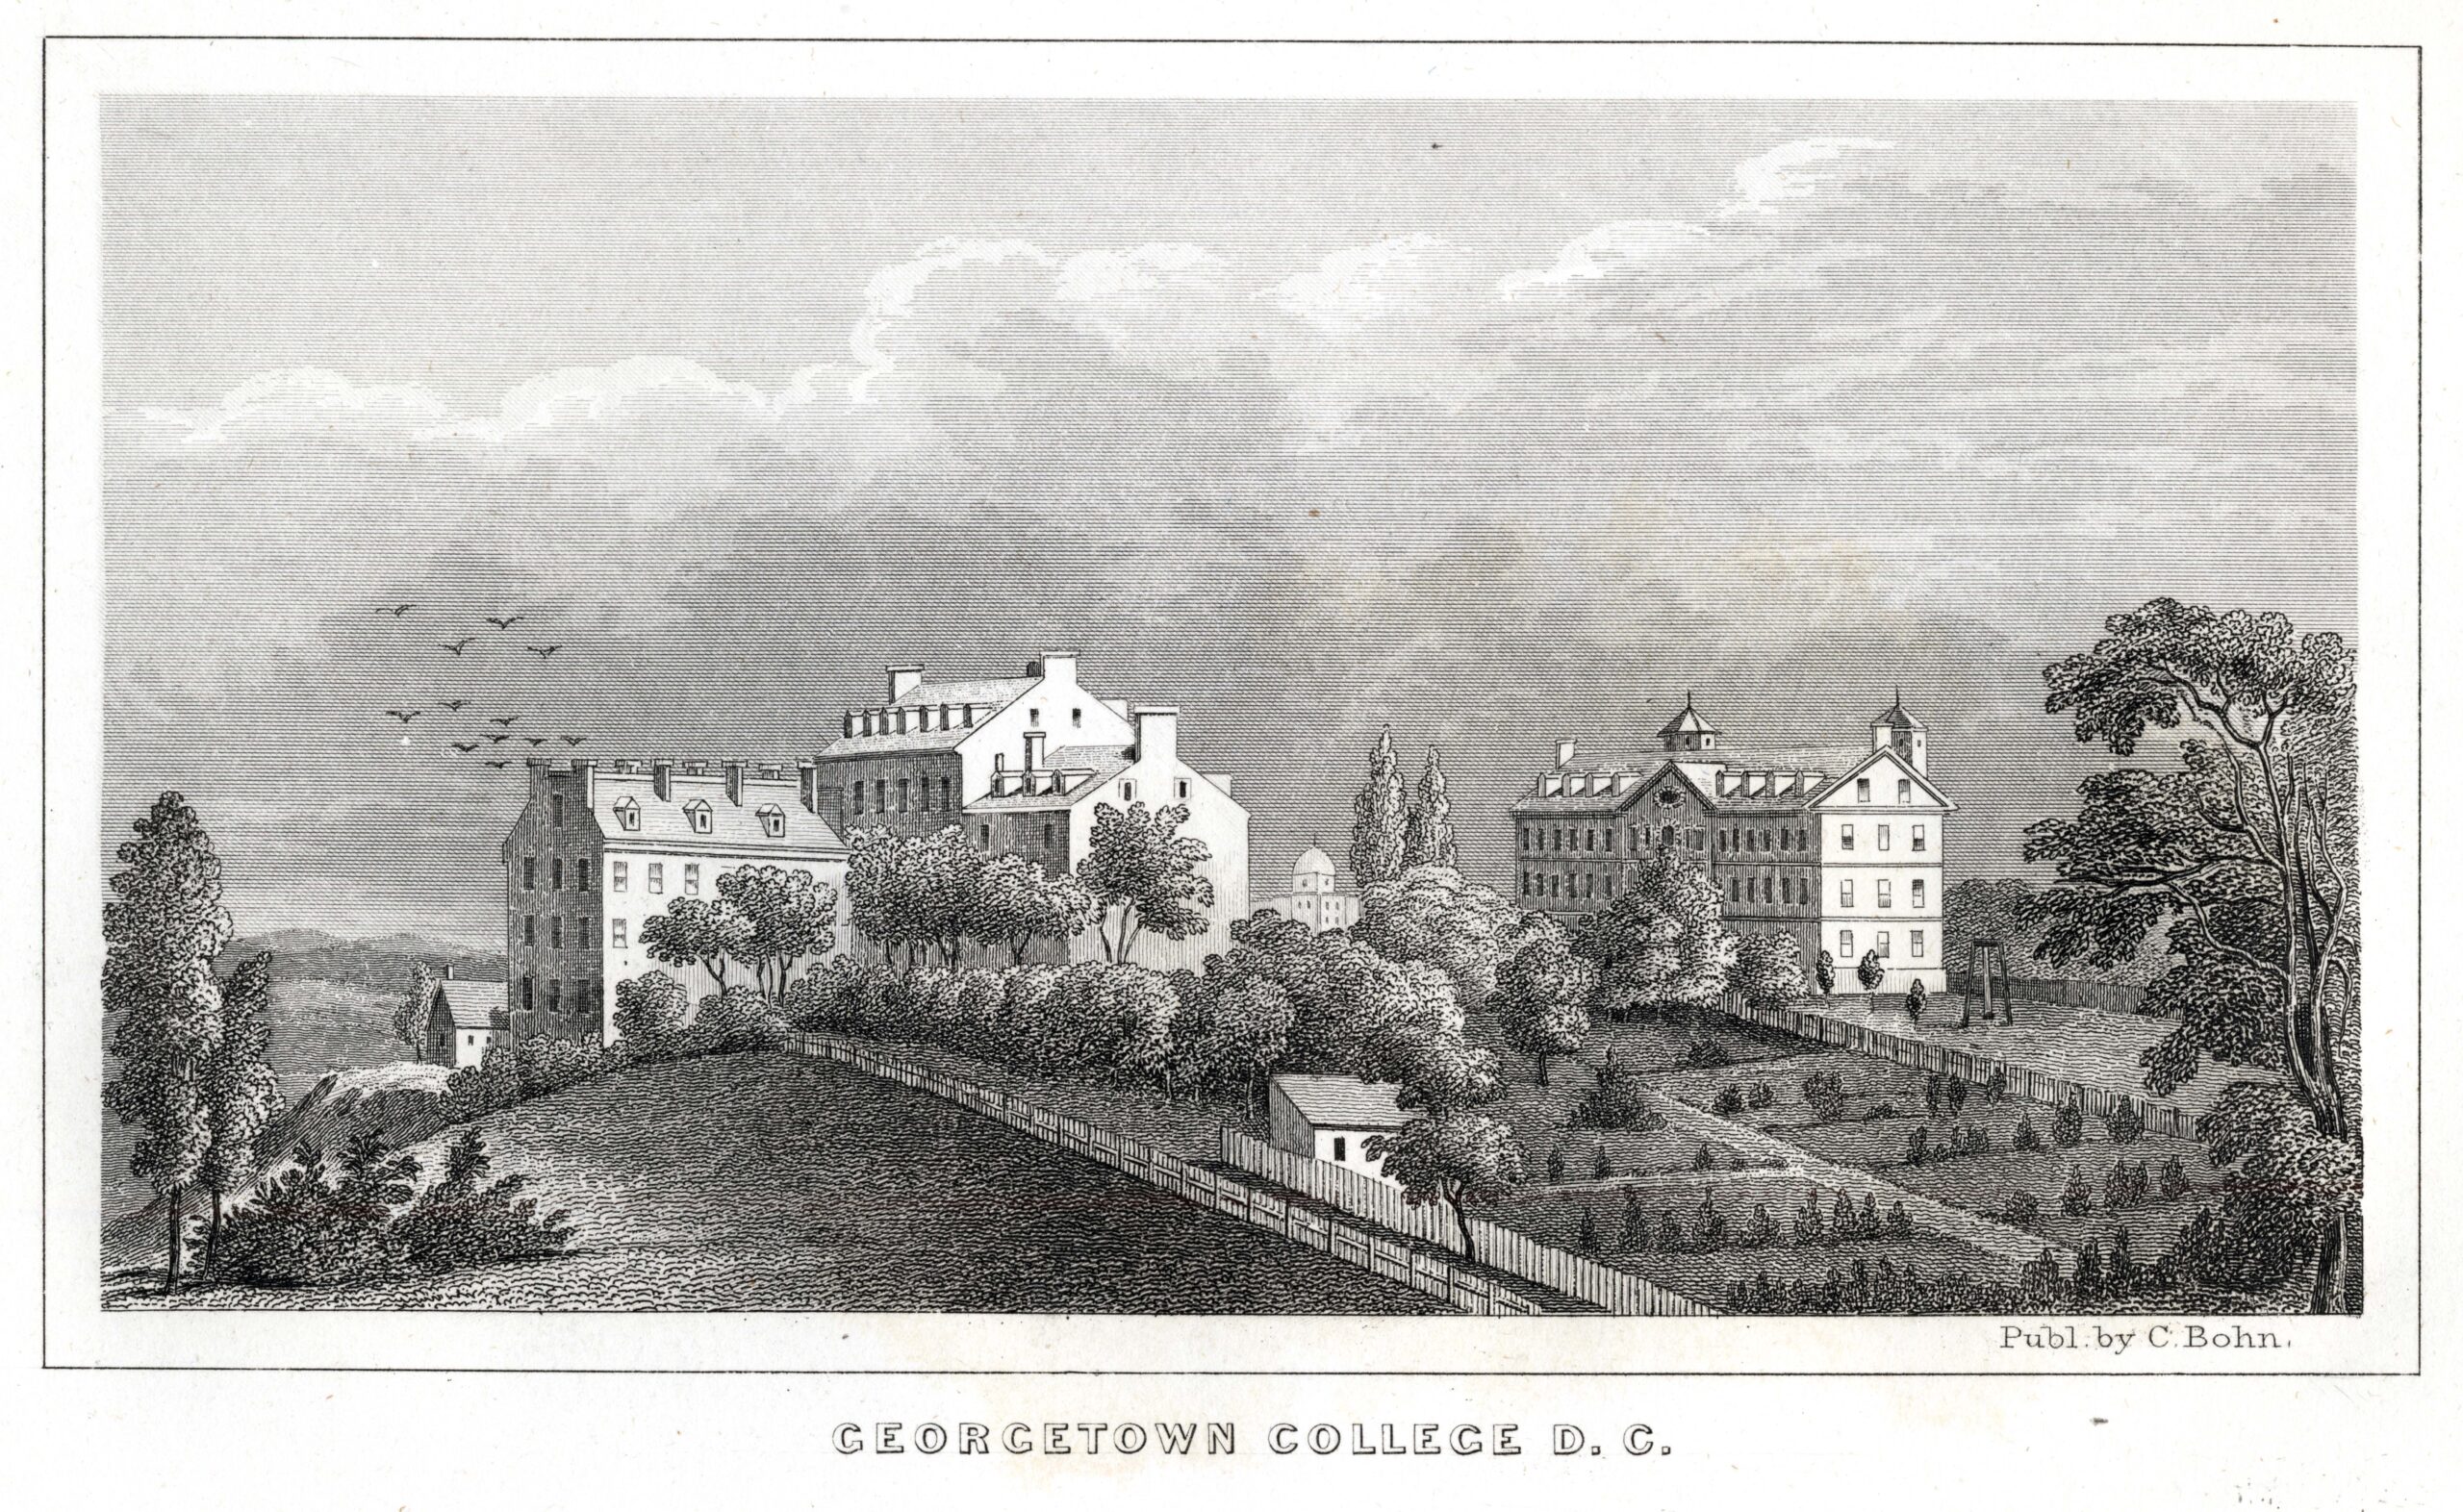 An early etching of Georgetown College.